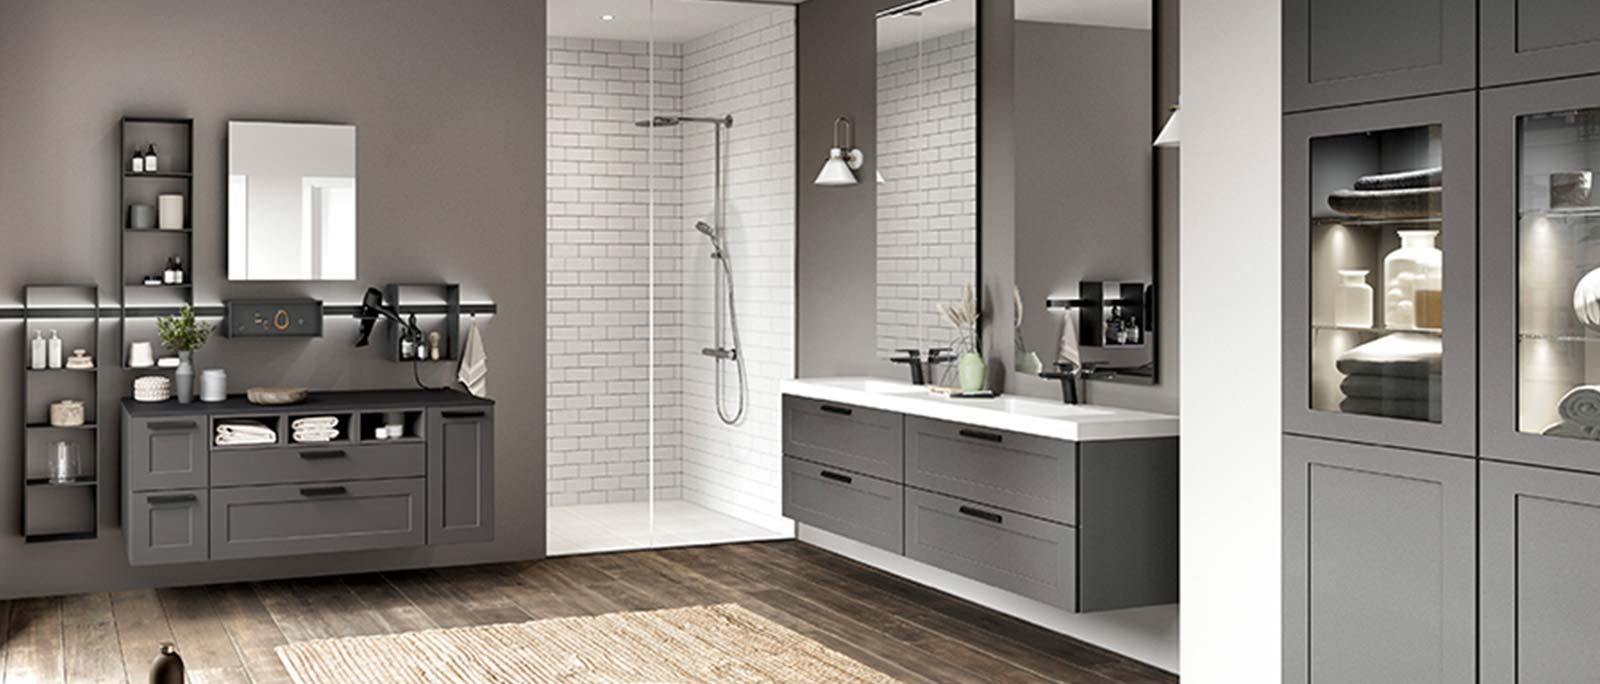 Stylish bathroom furniture design for your home